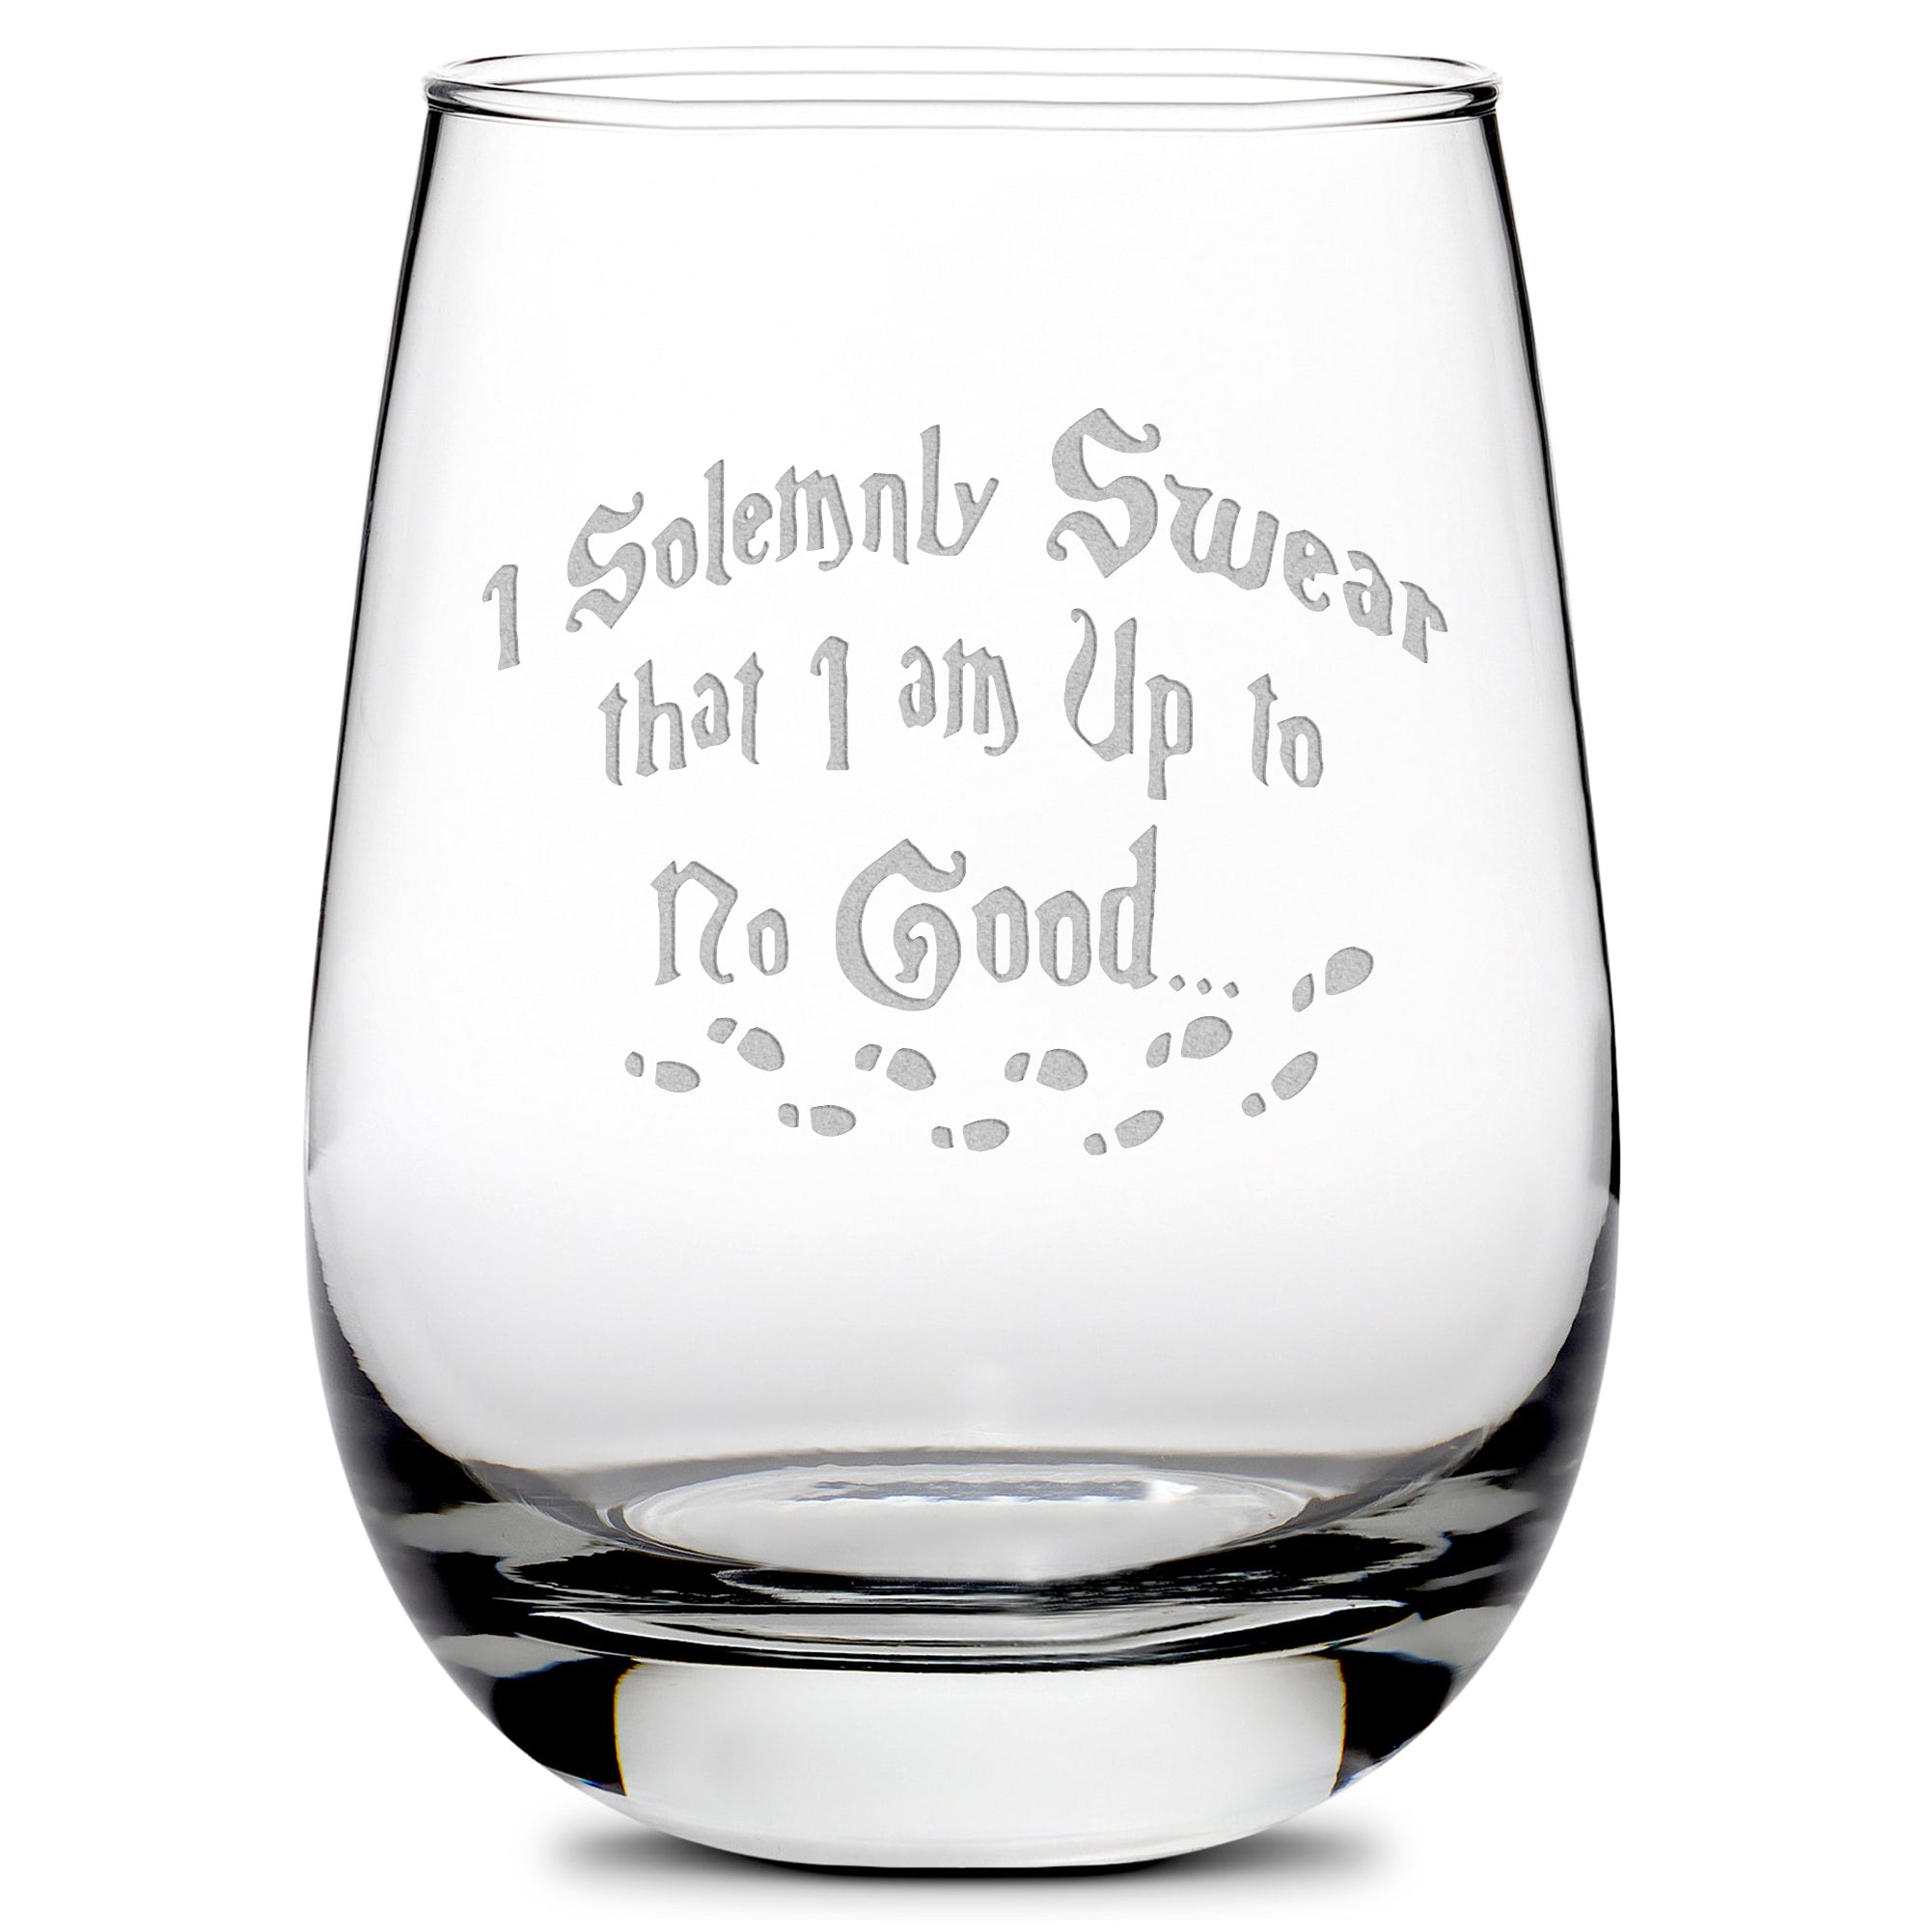 Premium Wine Glass, Harry Potter, I Solemnly Swear that I am Up to No Good, 16oz